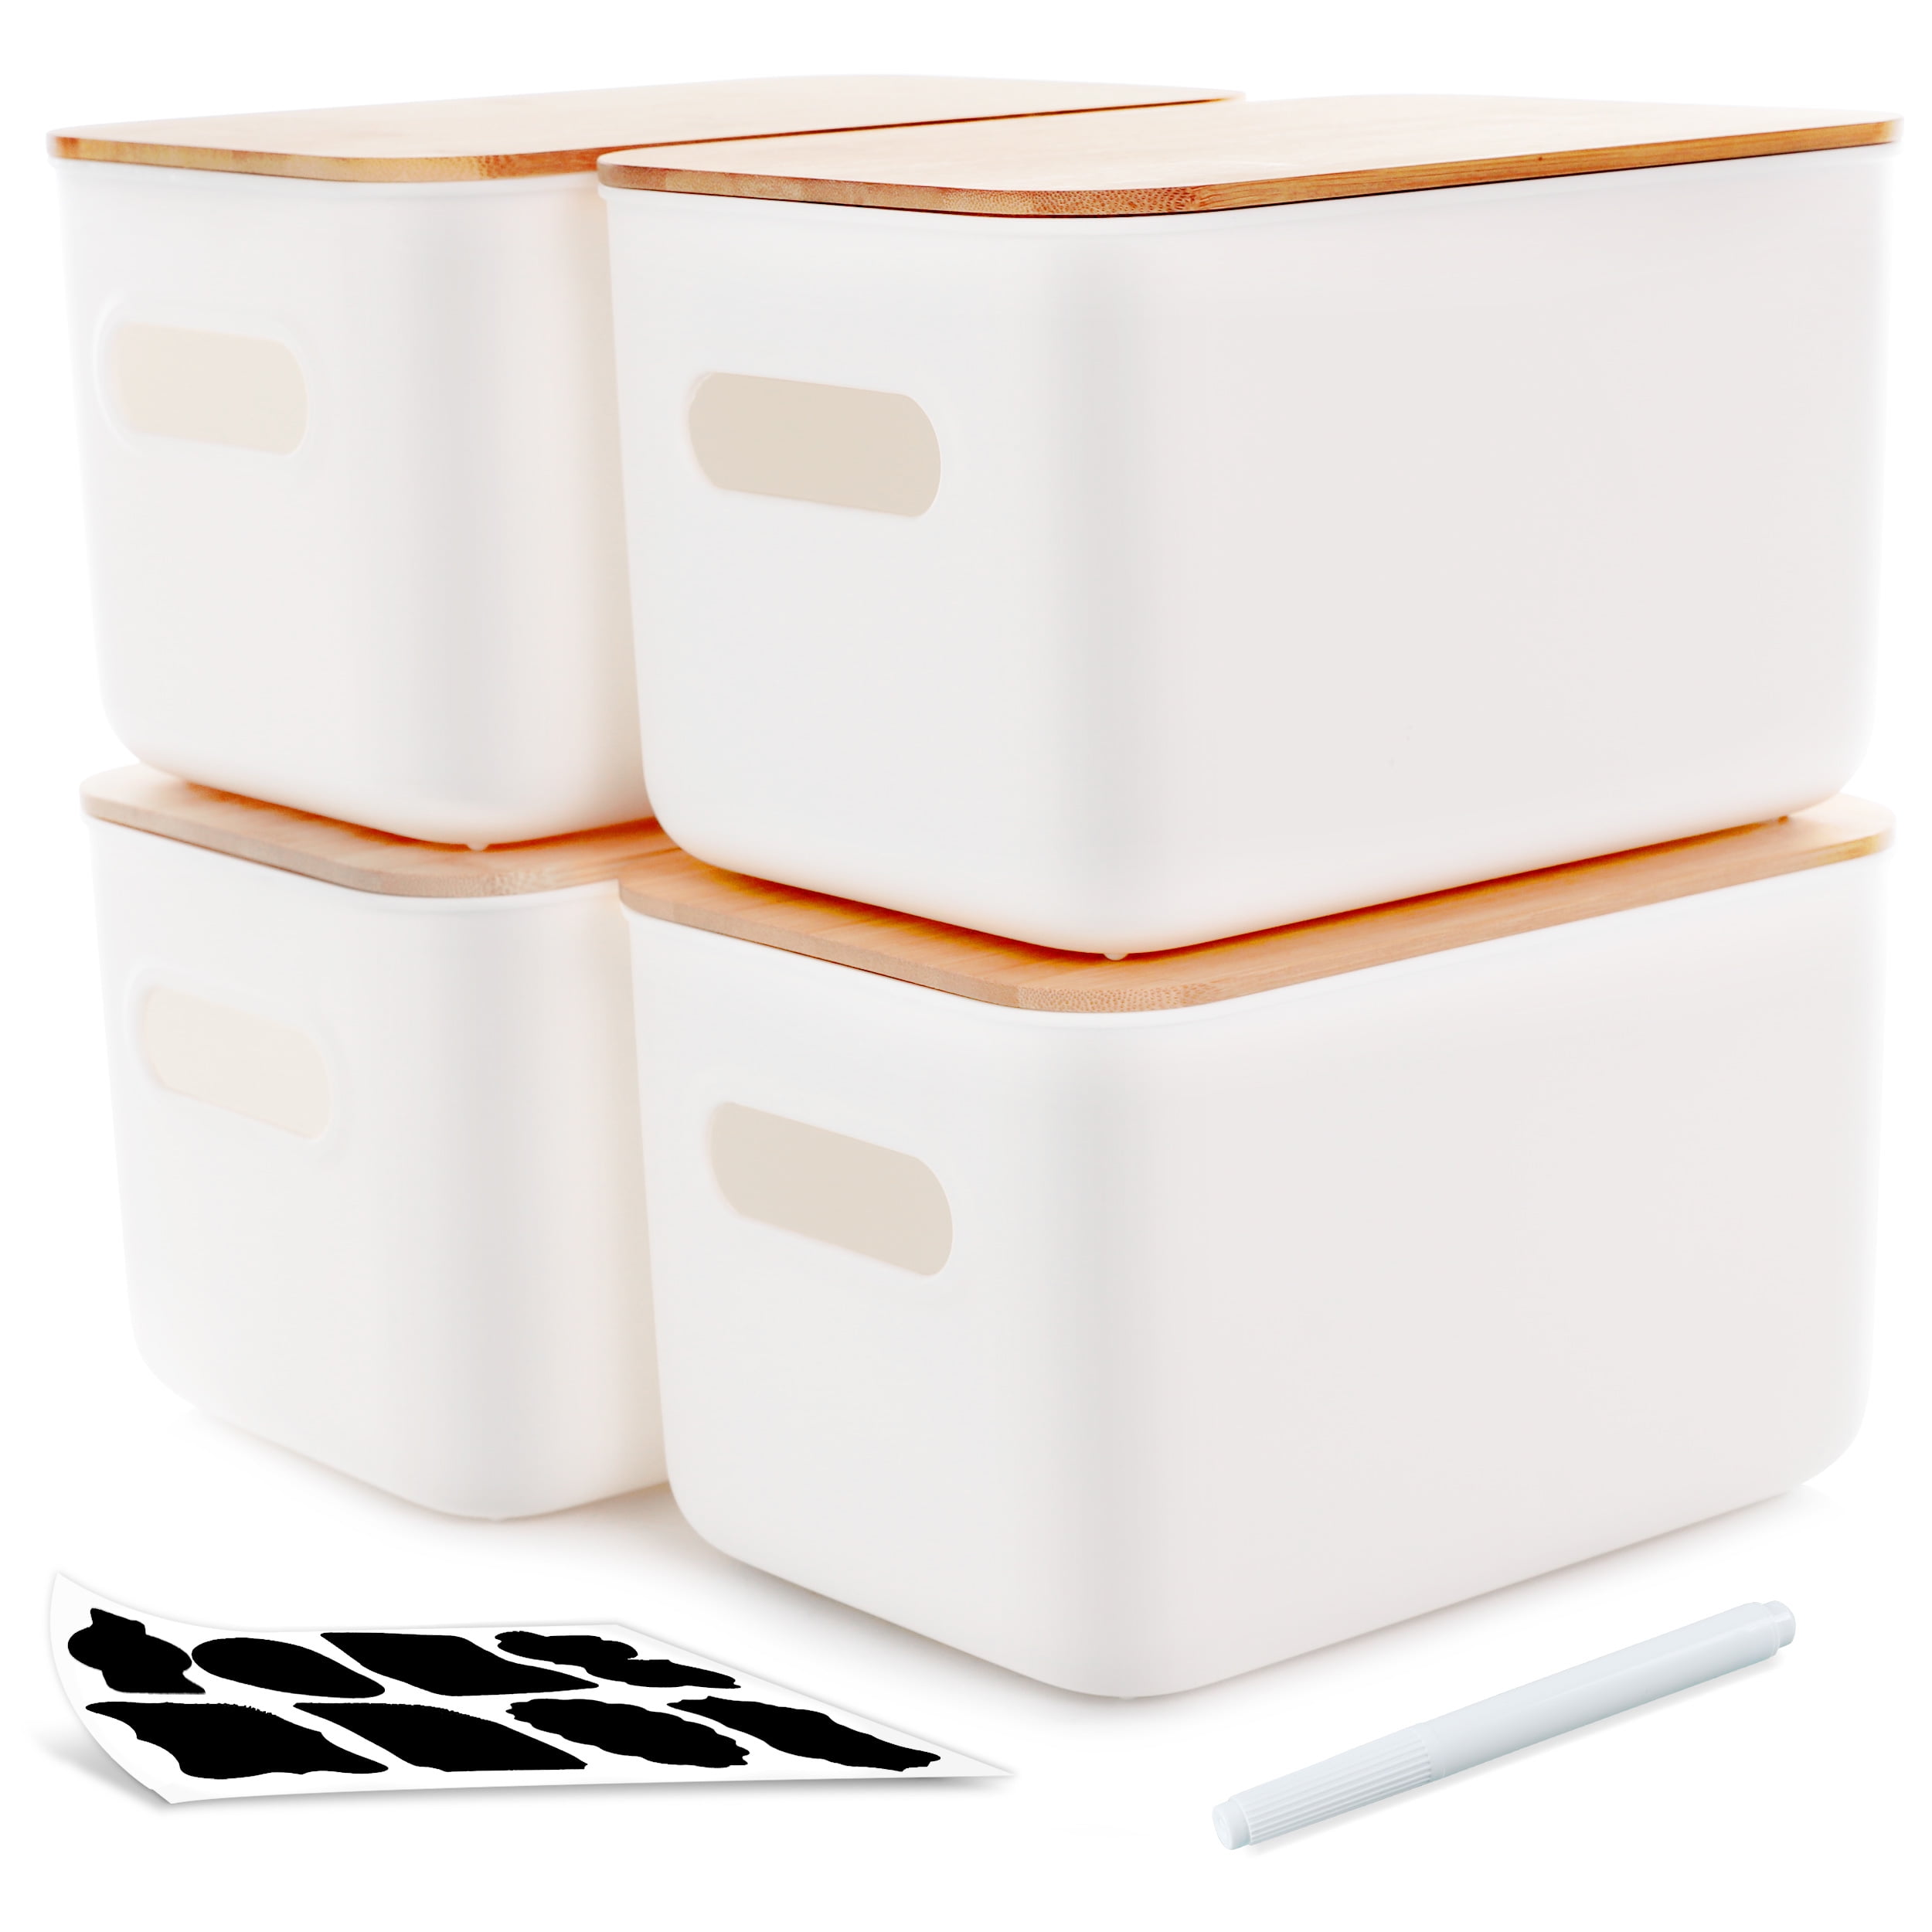 Plastic Storage Containers with Bamboo Lids, Medicine Cabinet